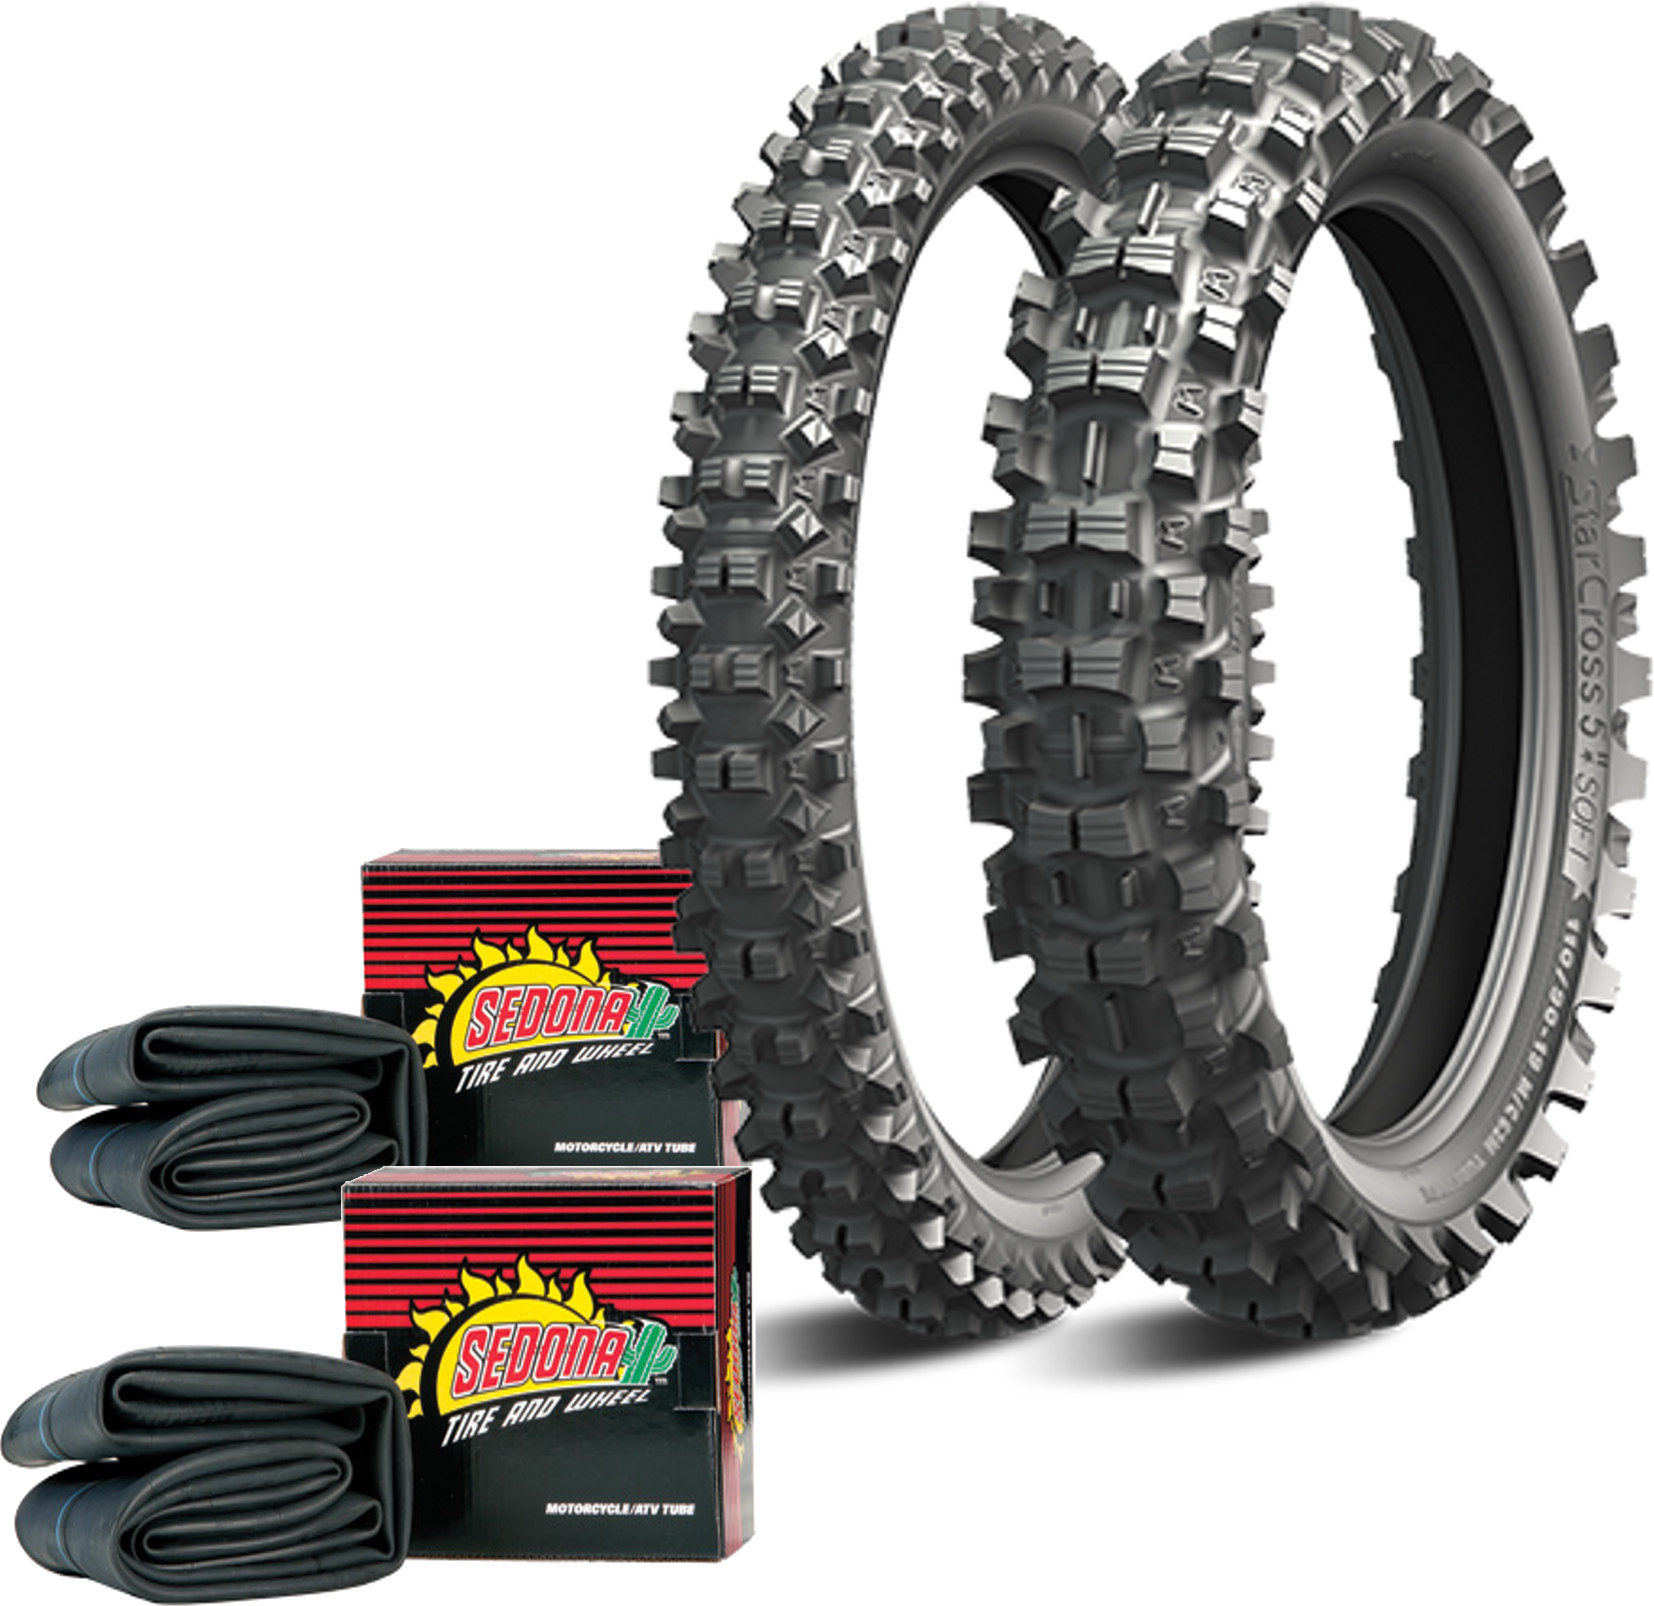 Starcross 5 Soft Front+Rear Tires 100/90-19 90/100-21 w/Tubes - Click Image to Close